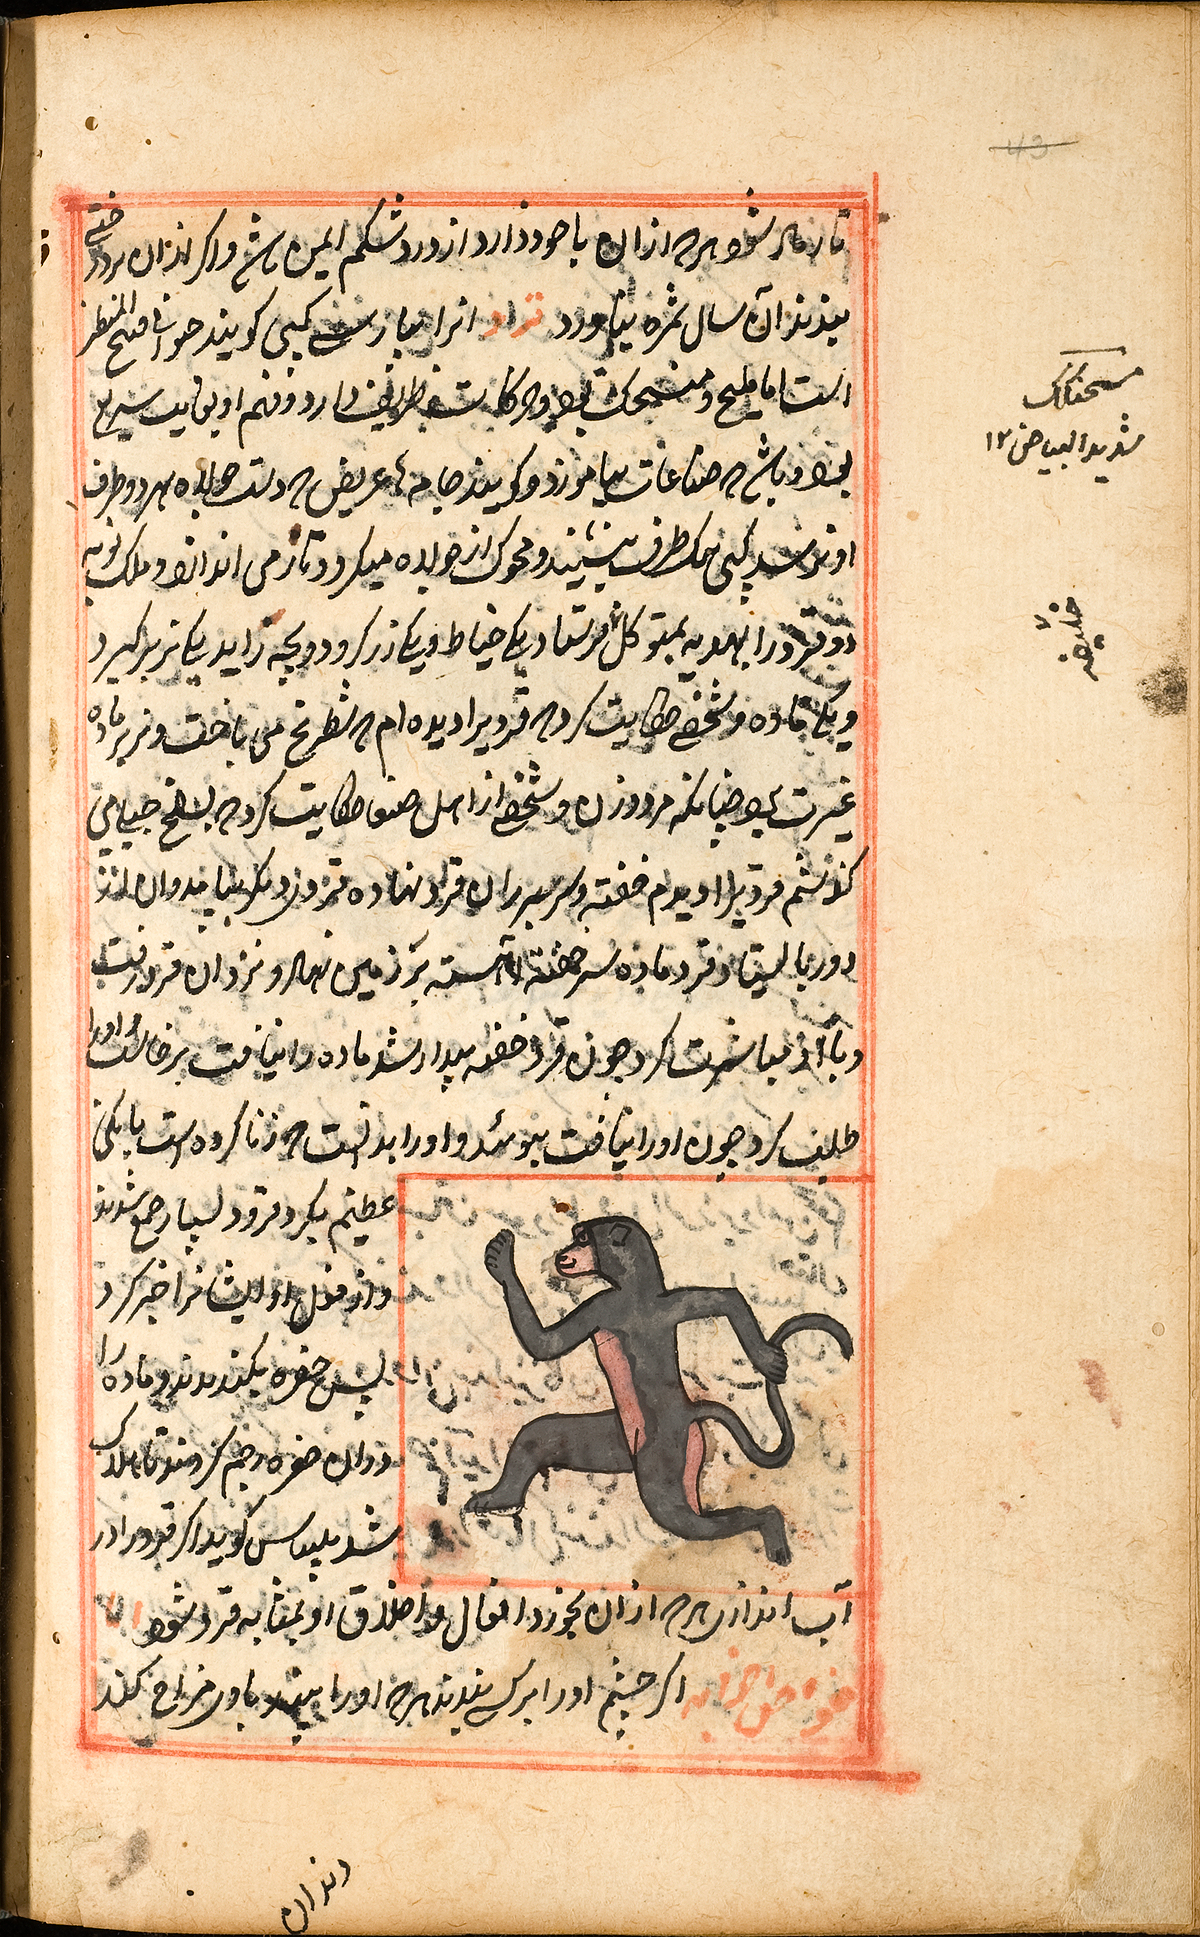 A gray baboon with pink face, chest, and rear end running to the left, surrounded by Persian text and a red double ruled border.